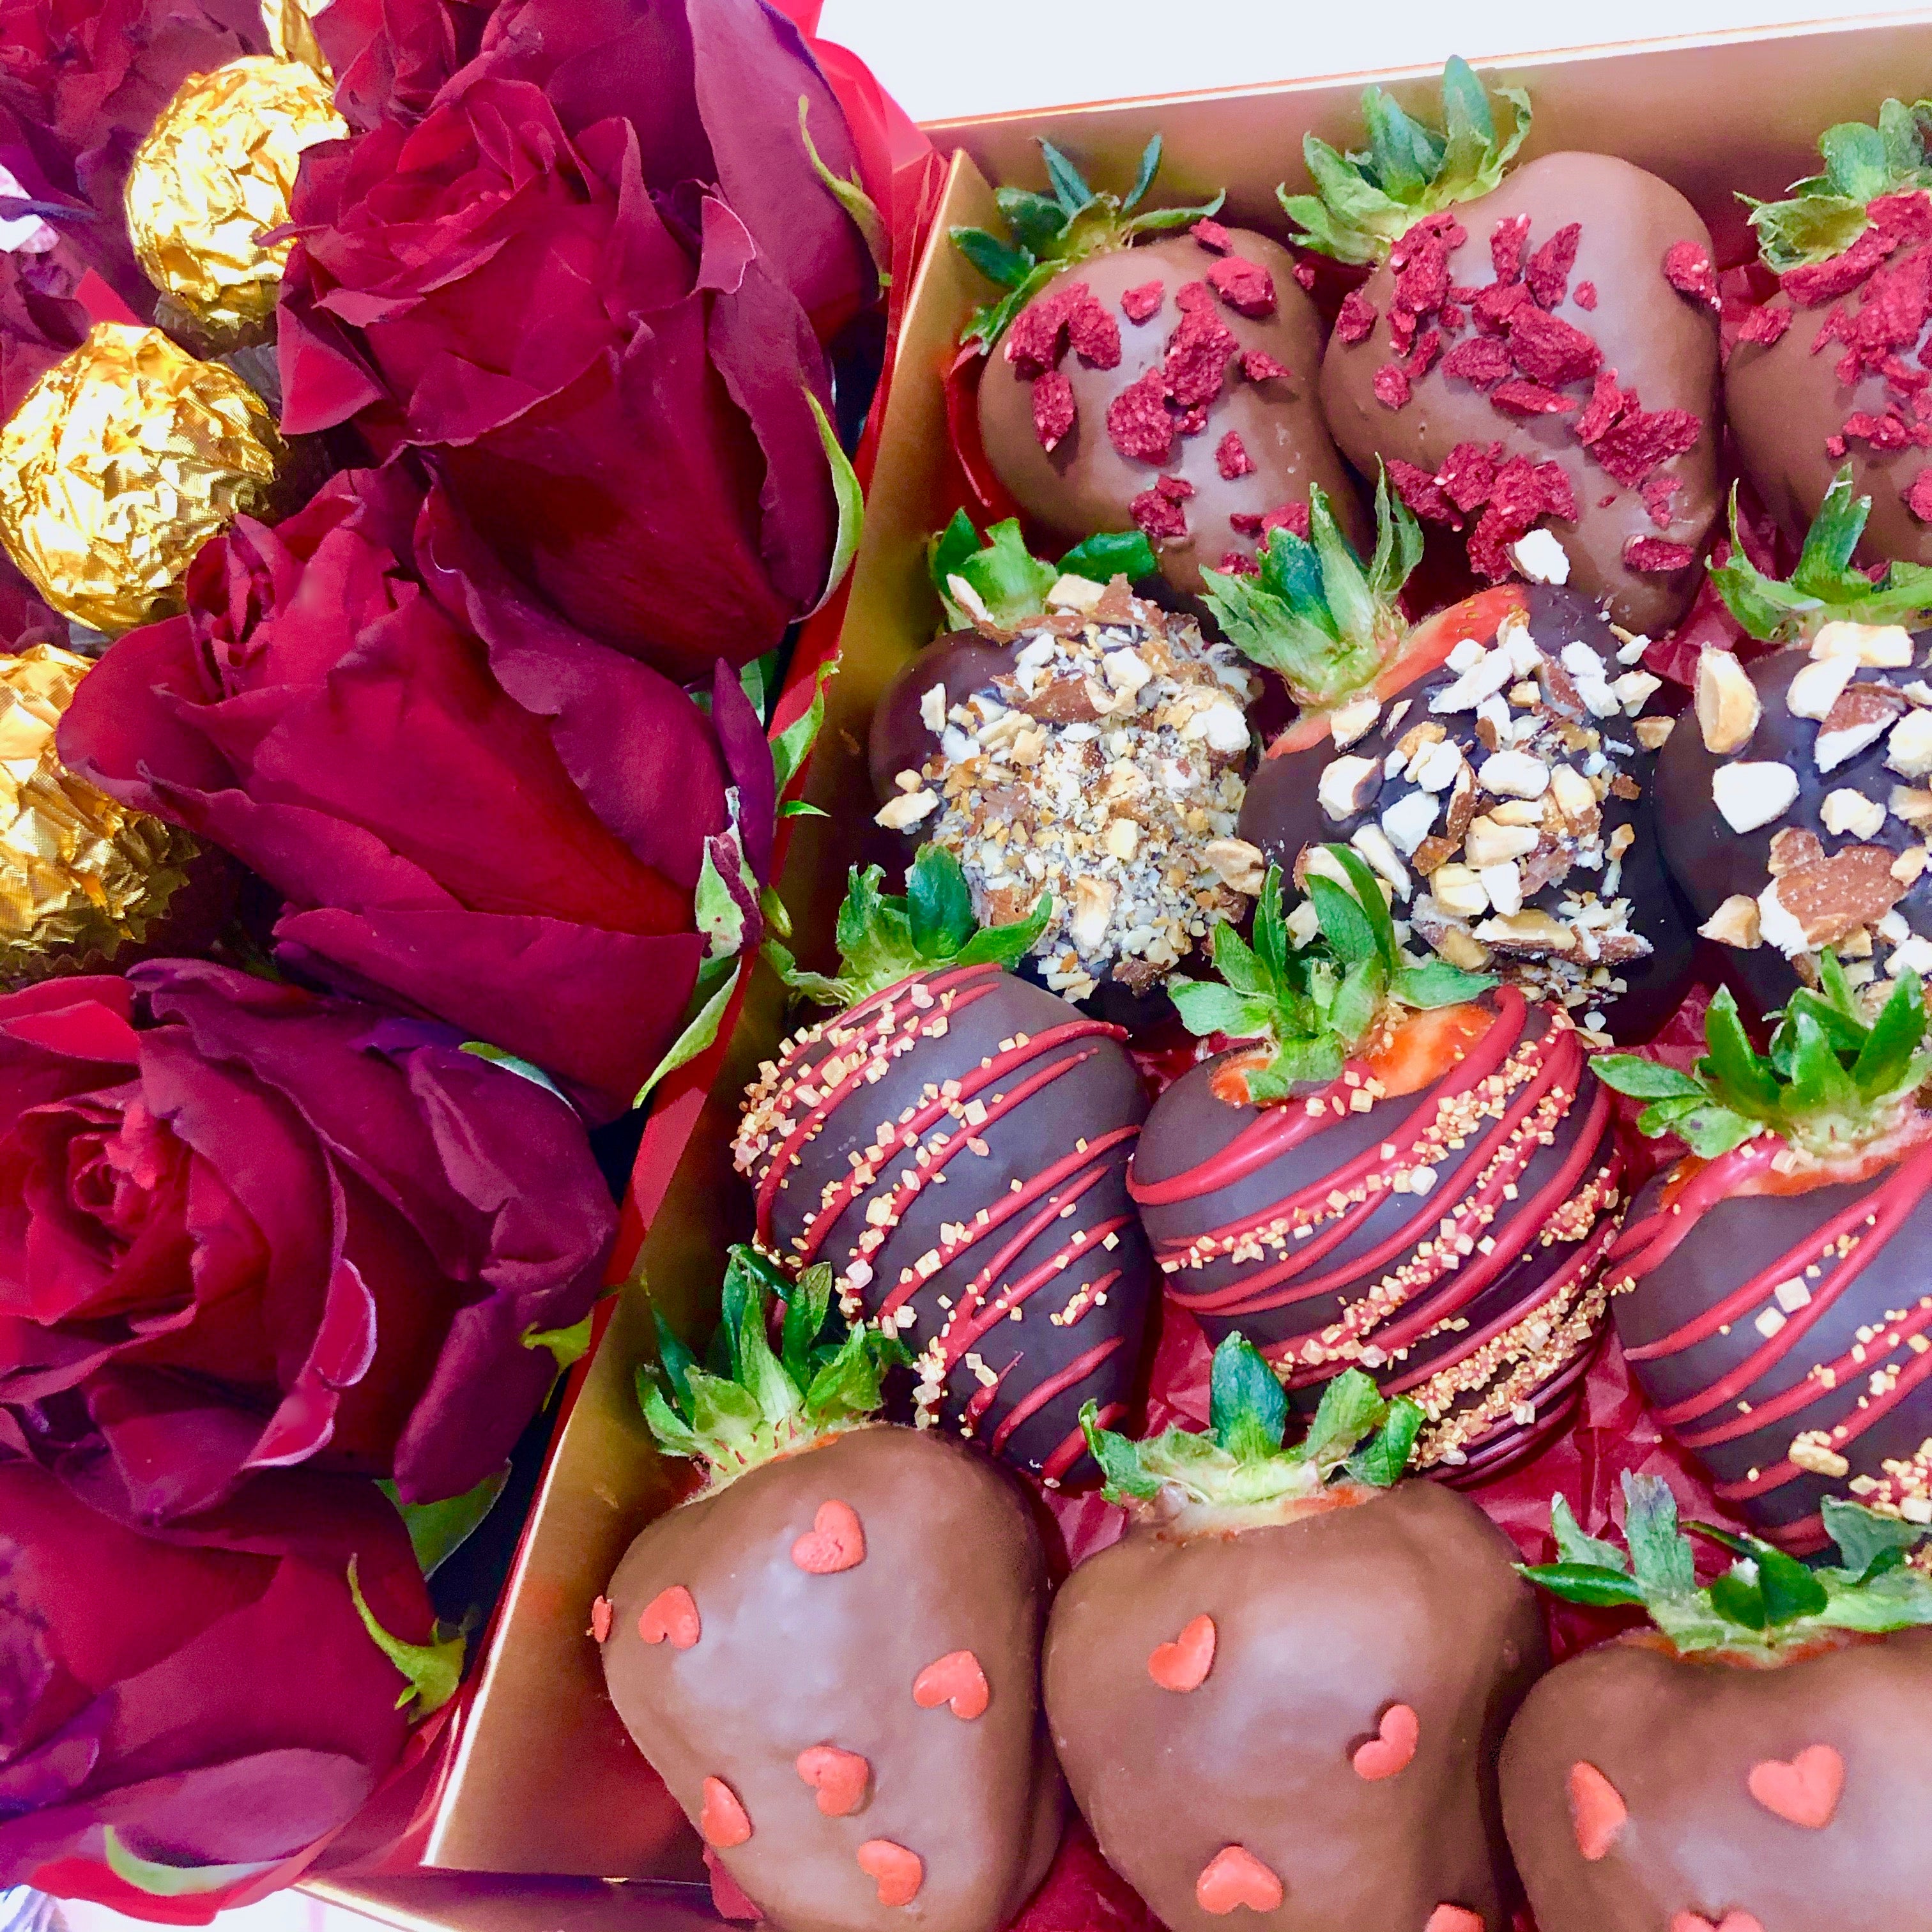 Chocolate Strawberry & Roses Gift Hamper send Chocolate same-day delivery Adelaide sent flowers same day delivery Adelaide